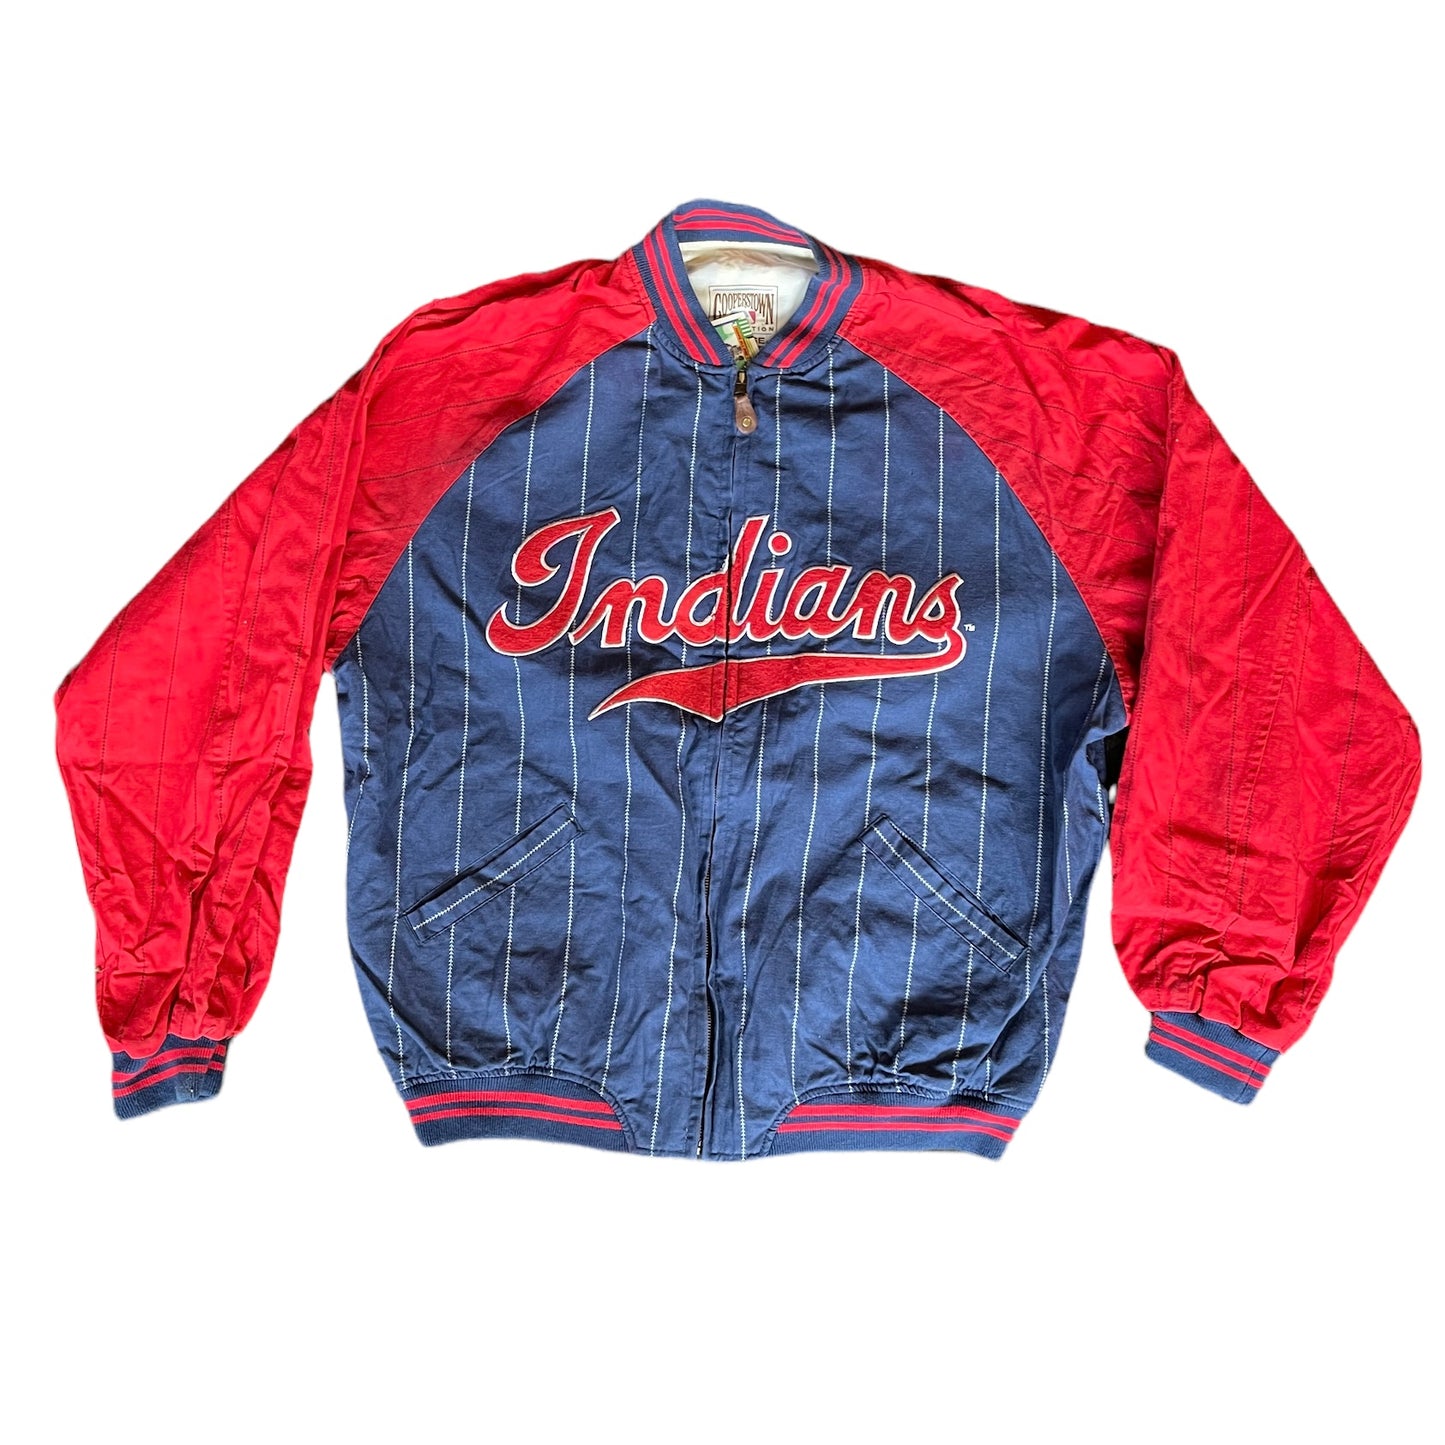 Vintage Cleveland Indians Cooperstown Collection Jacket